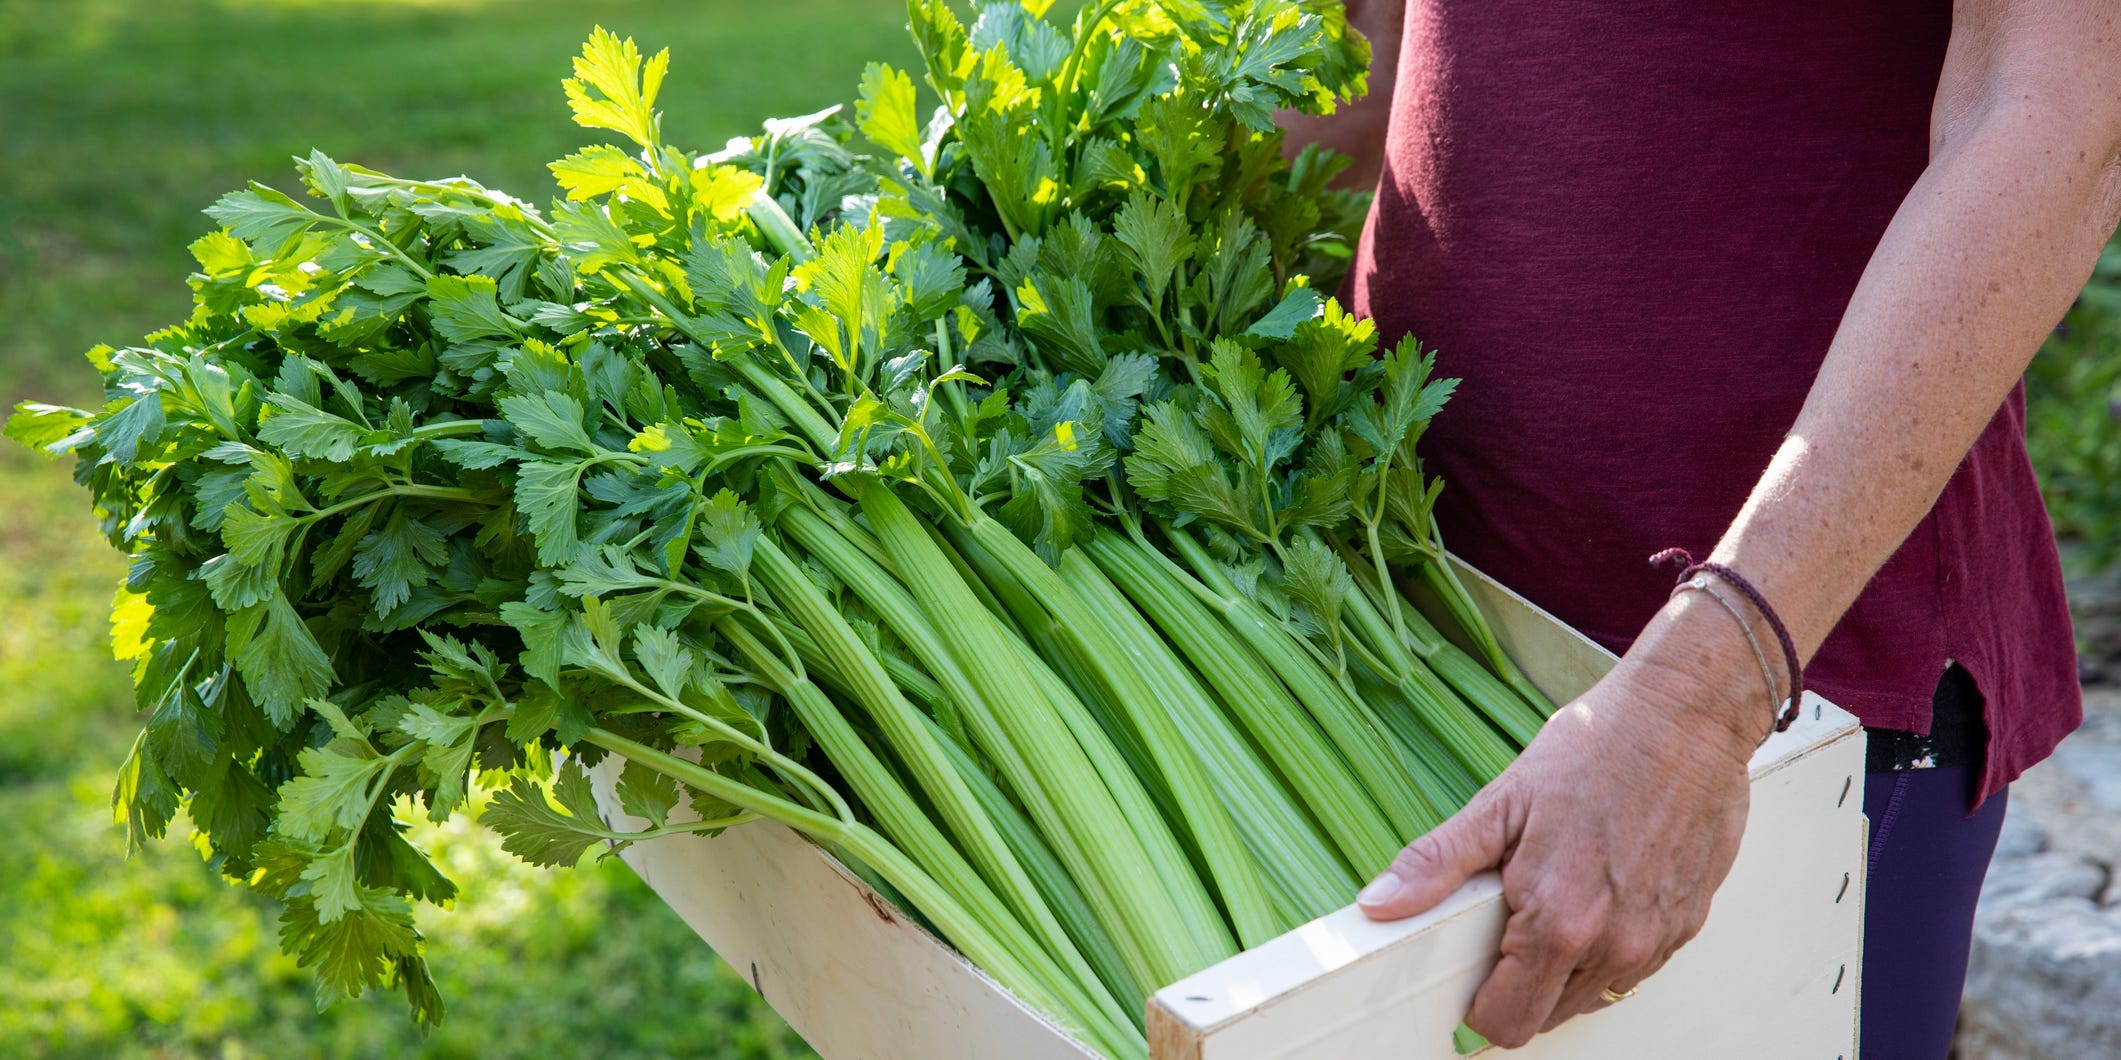 Person holding a crate of a large bundle of celery with the leaves on